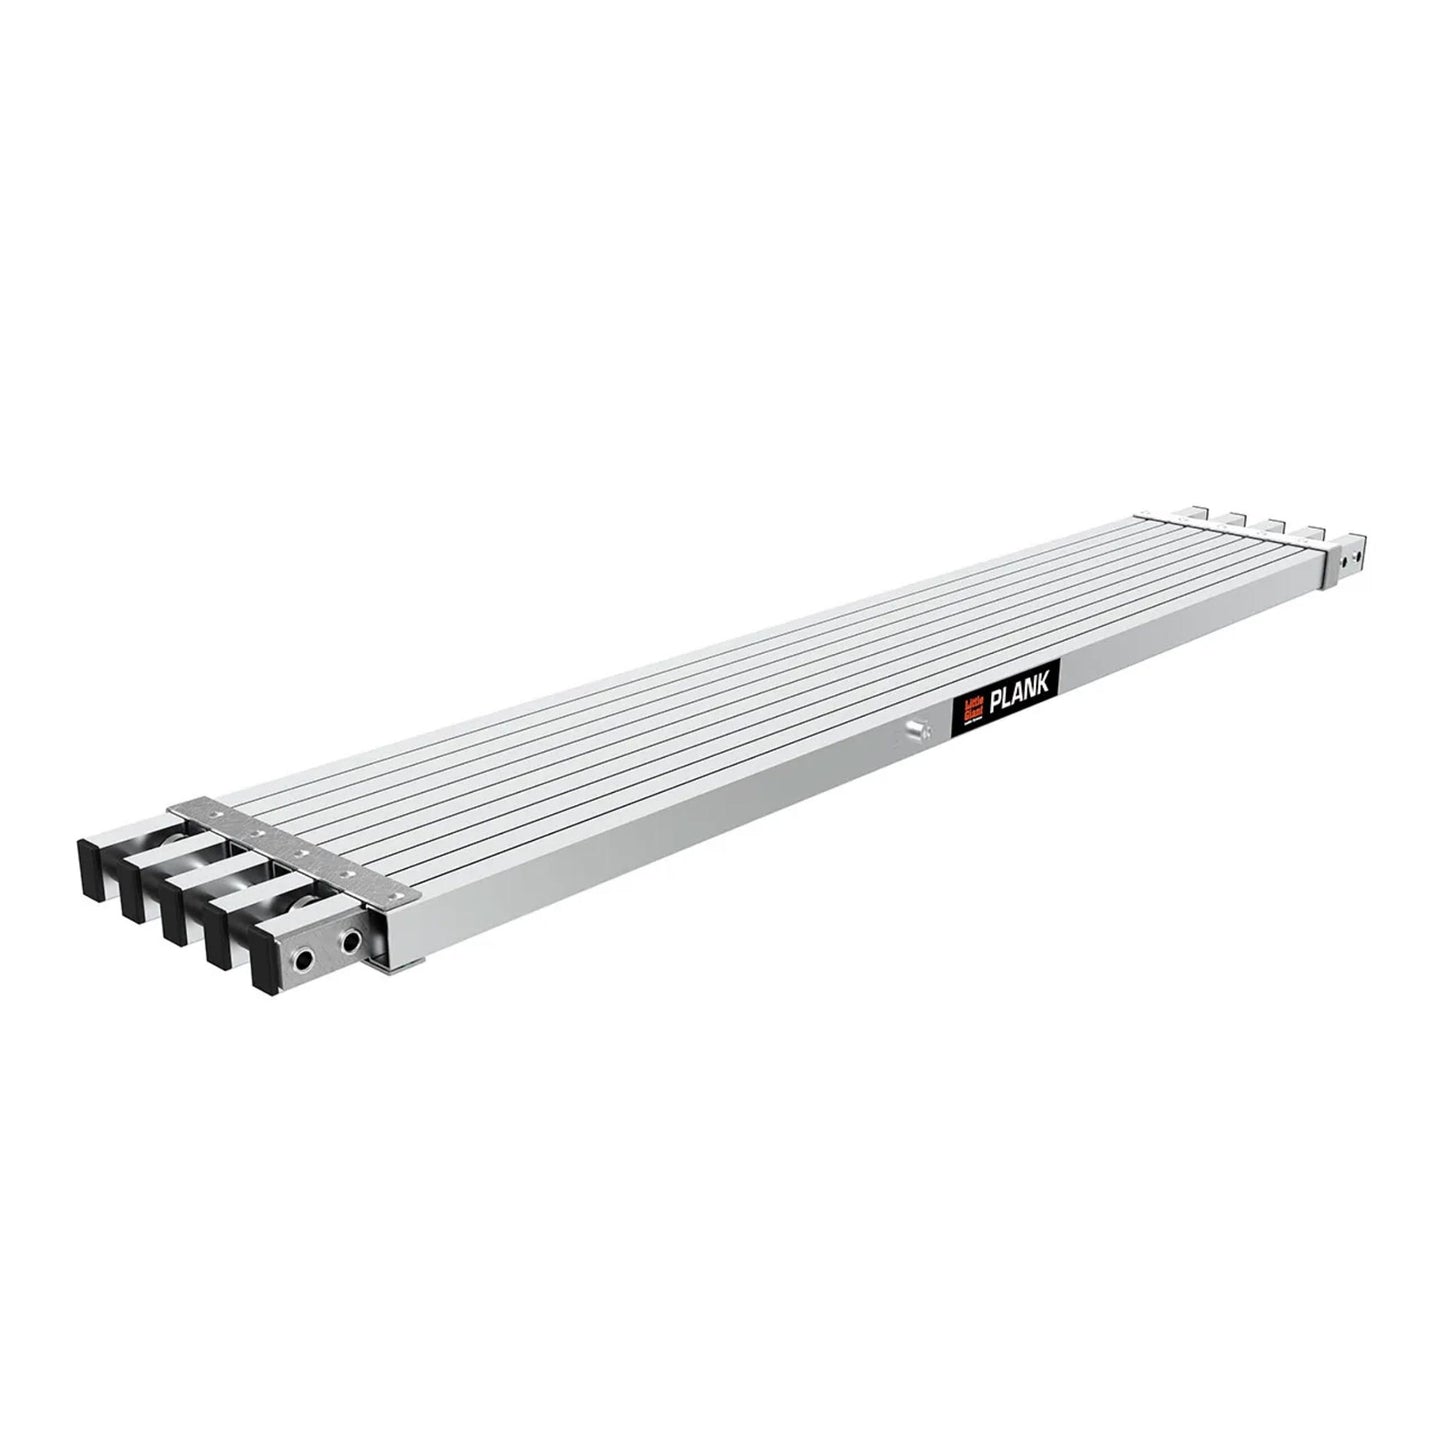 Little Giant™ Telescopic Plank 2 - 3m, 220kg Weight Rating